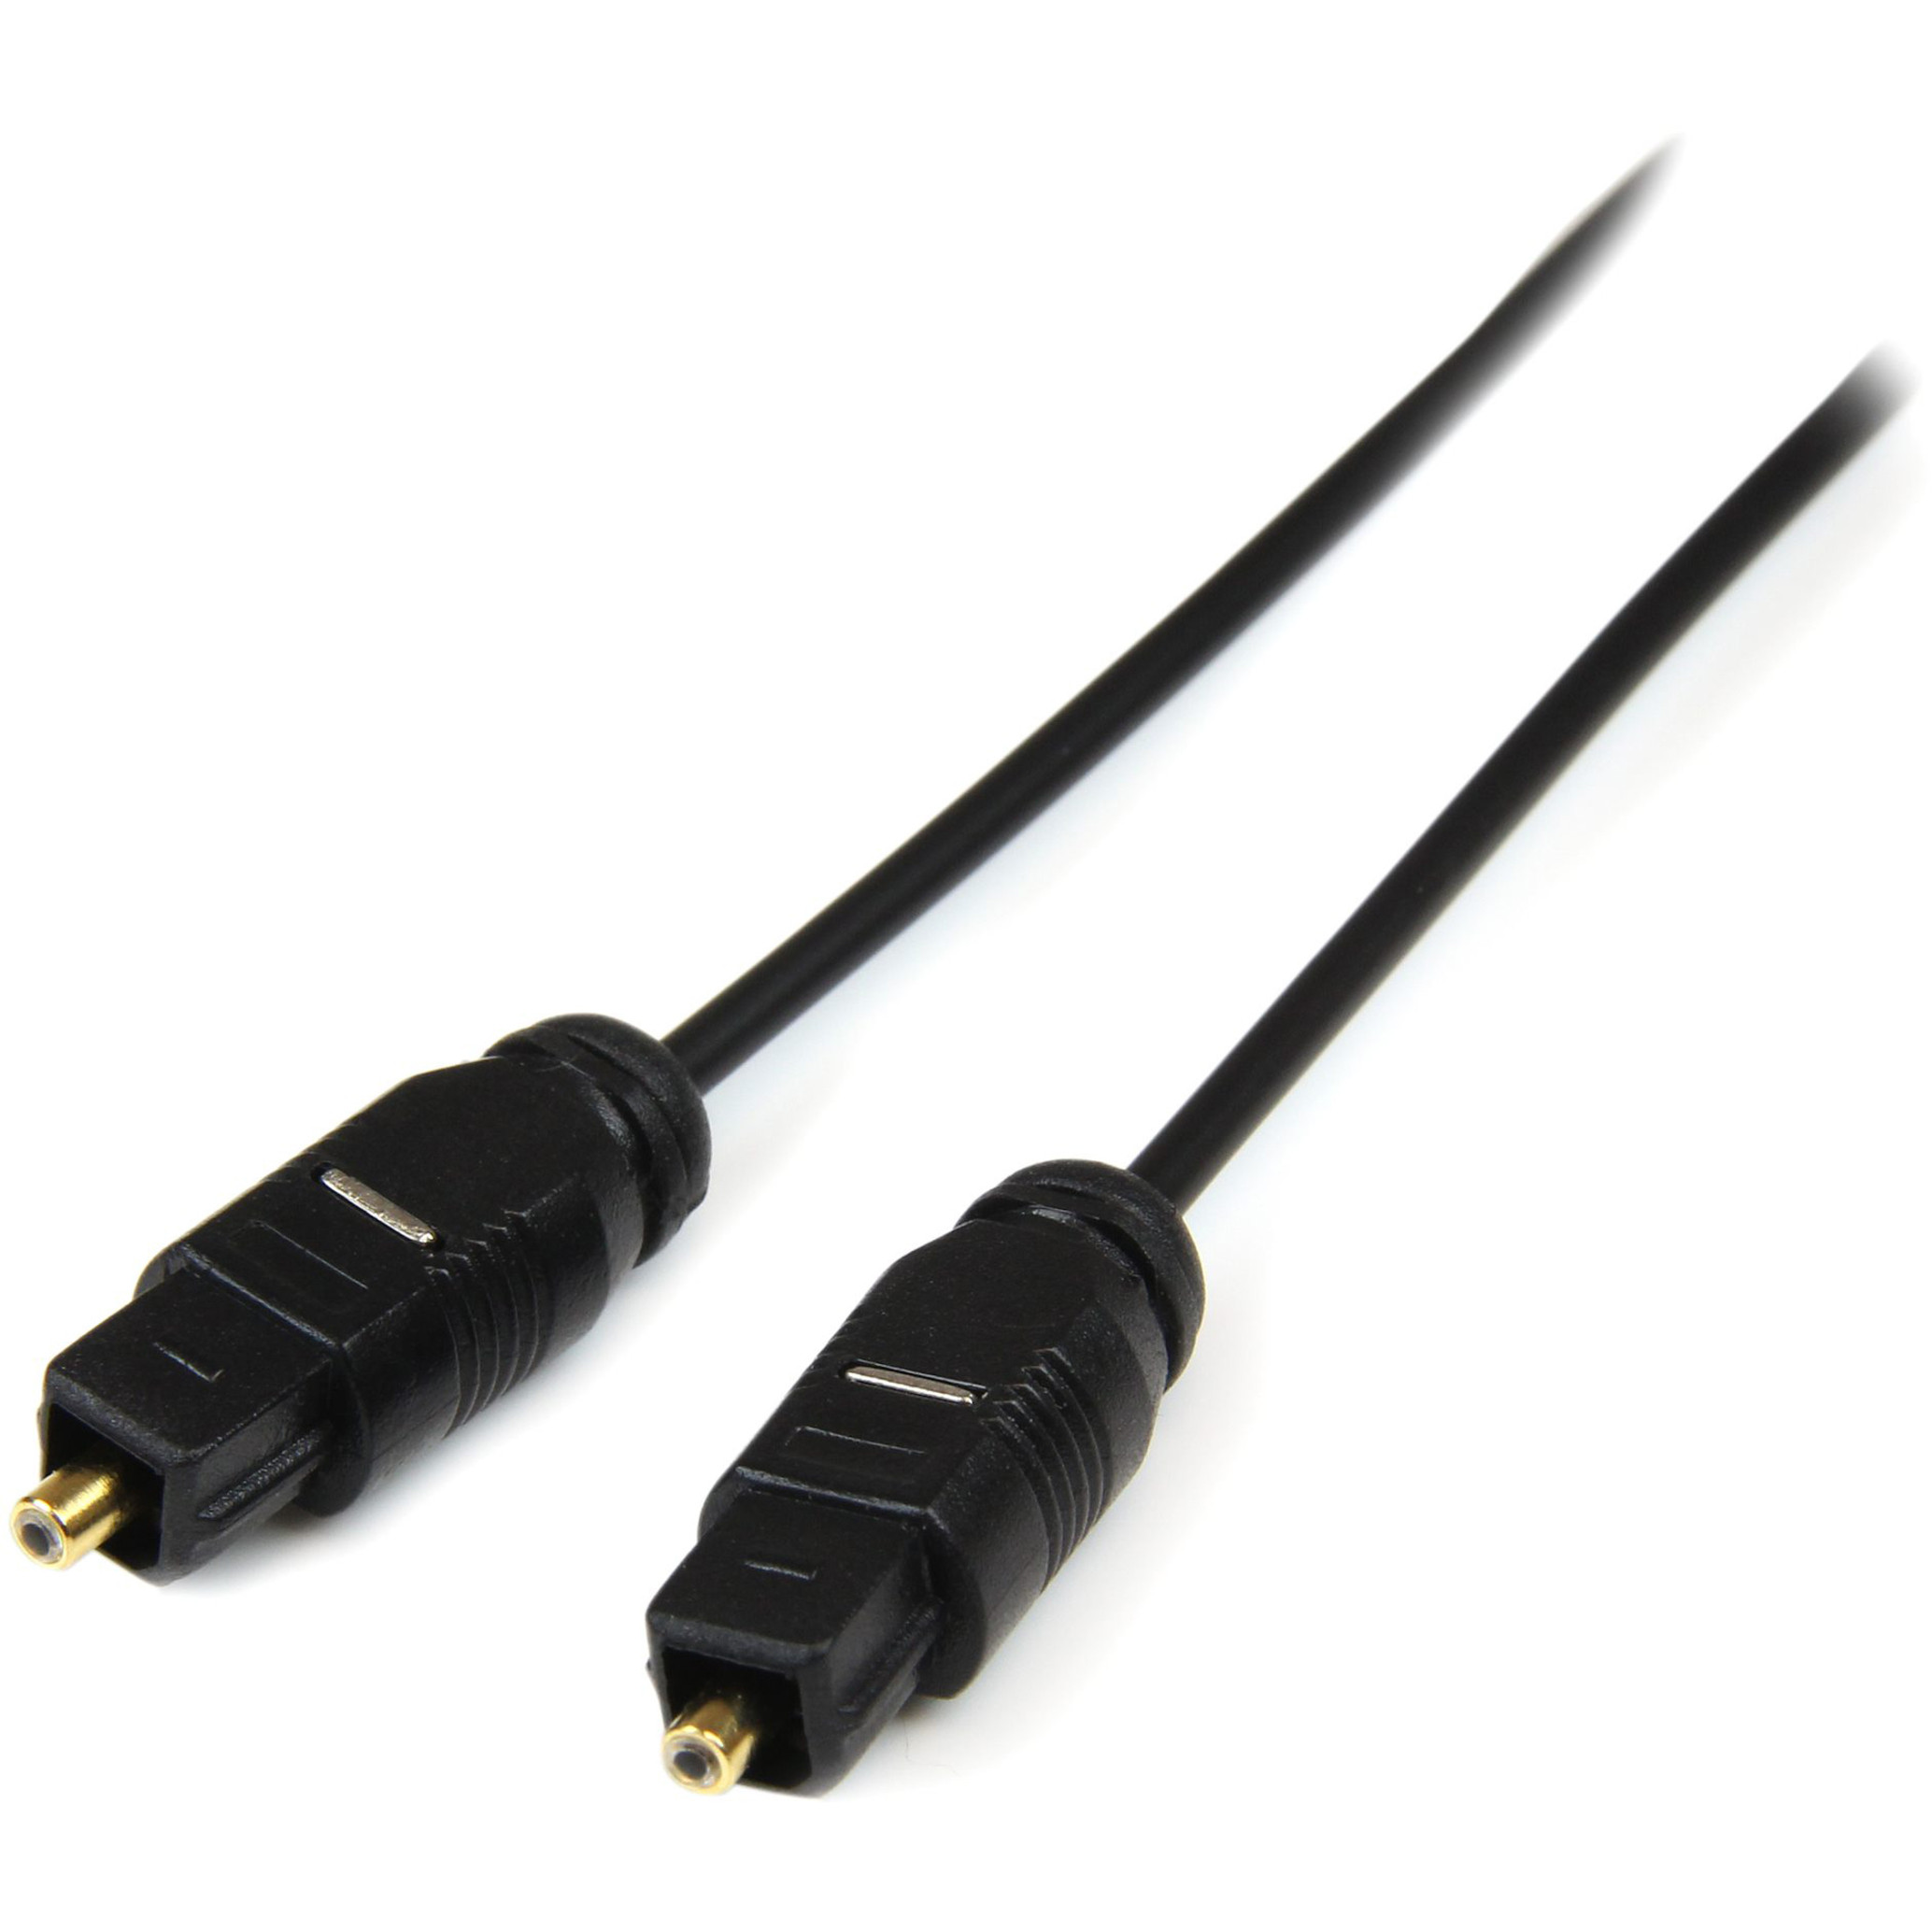 Startech .com 15 ft Thin Toslink Digital Optical SPDIF Audio CableDeliver high quality optical digital sound, even at extreme volumes15 f… THINTOS15